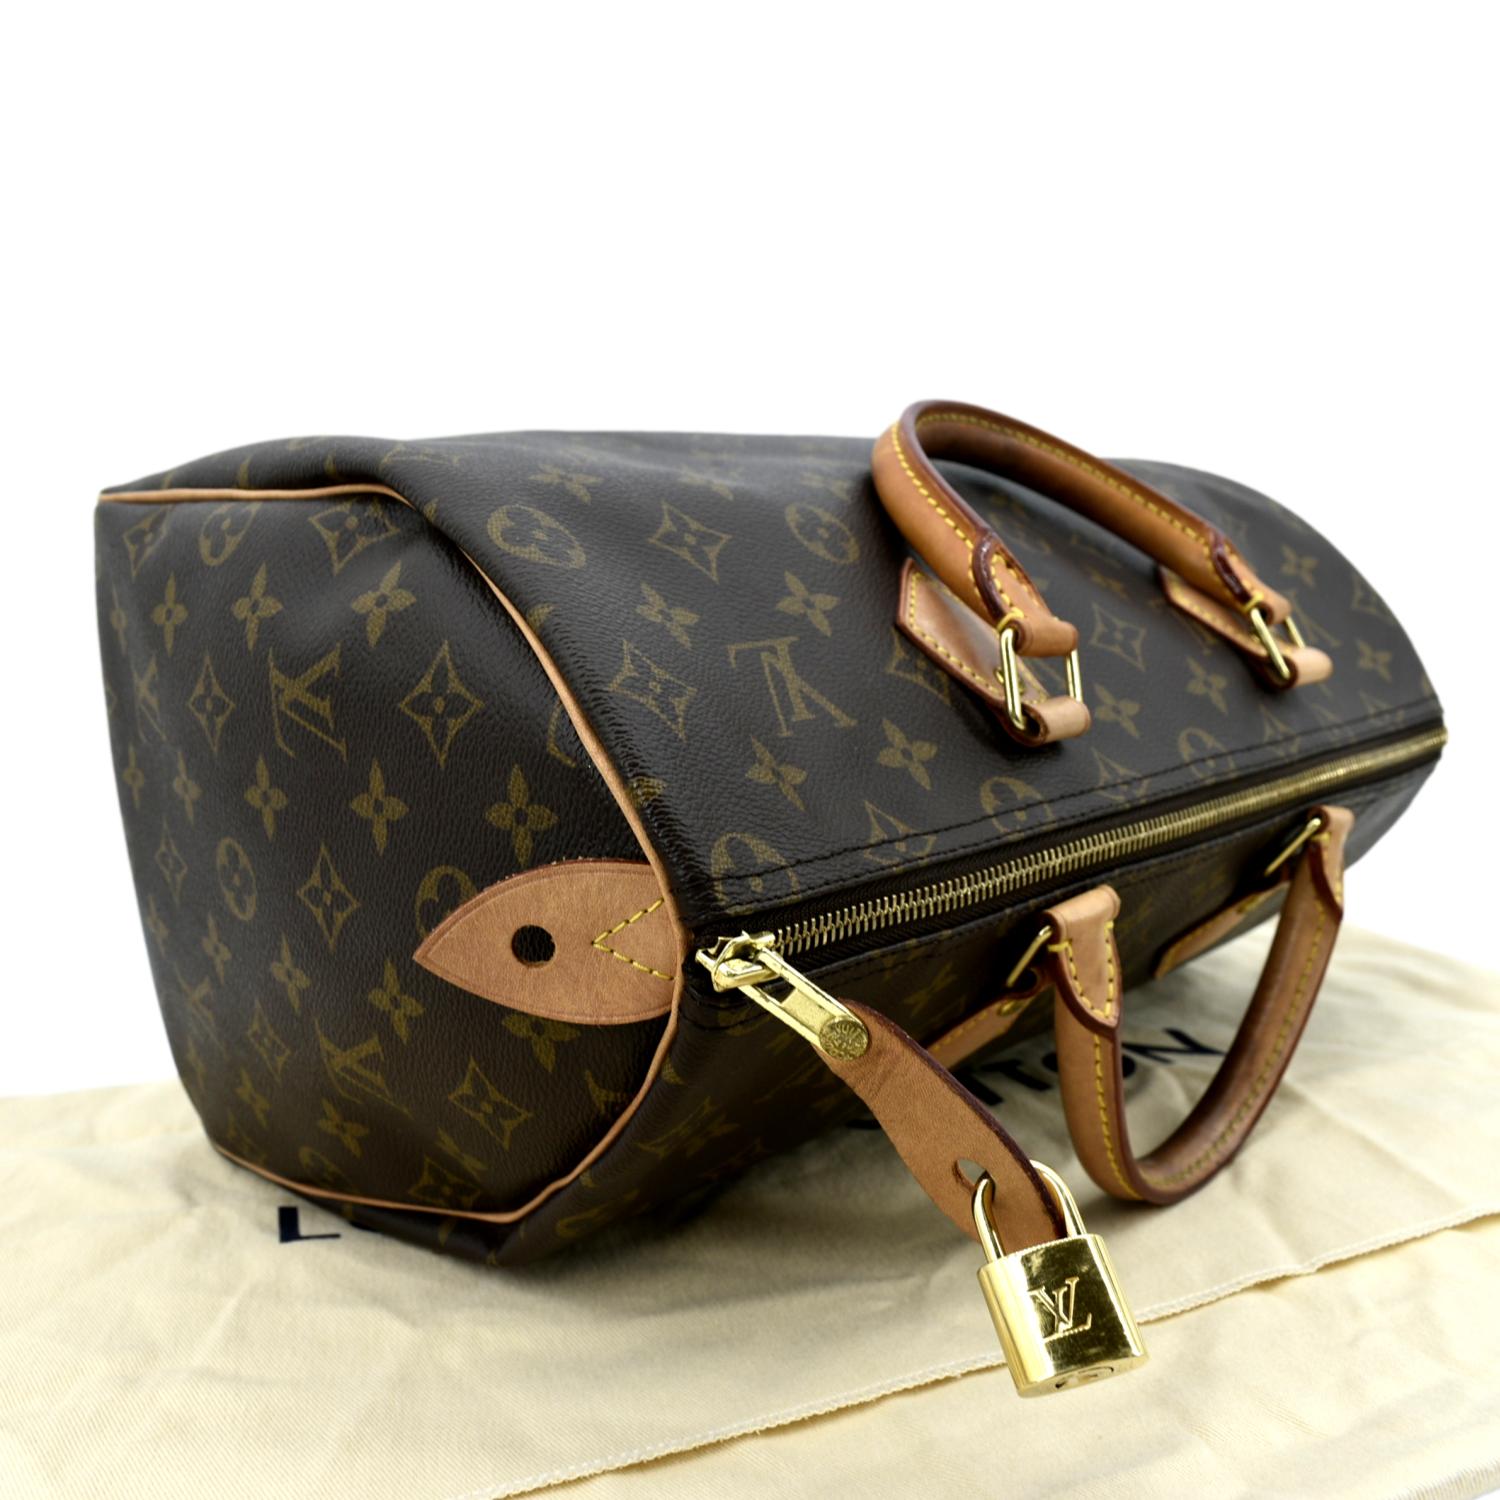 100% Authentic Lv Speedy 35 [Preloved] - Bags & Wallets for sale